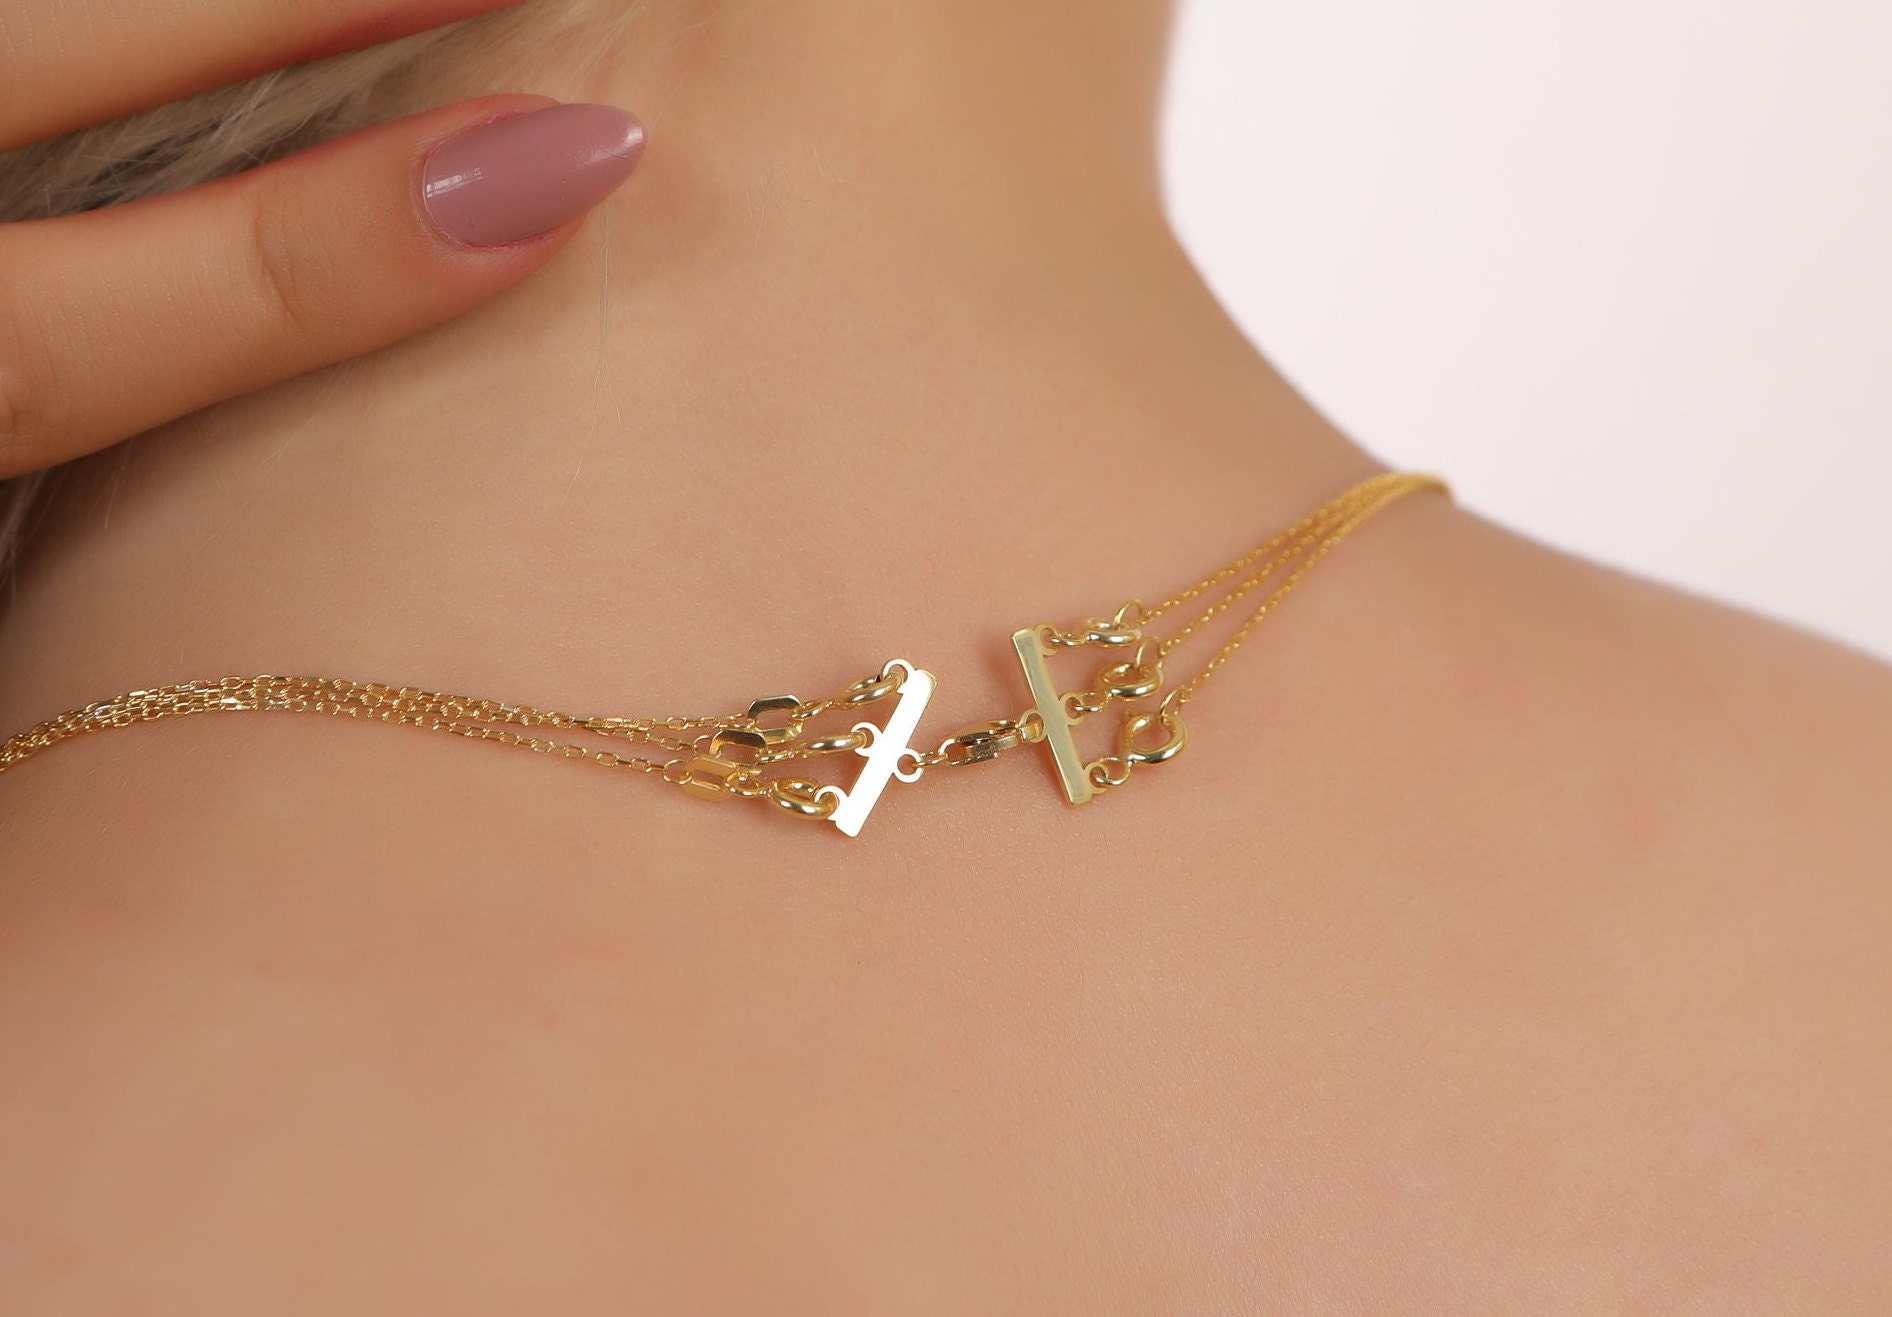 Necklace Spacer - LanaBetty